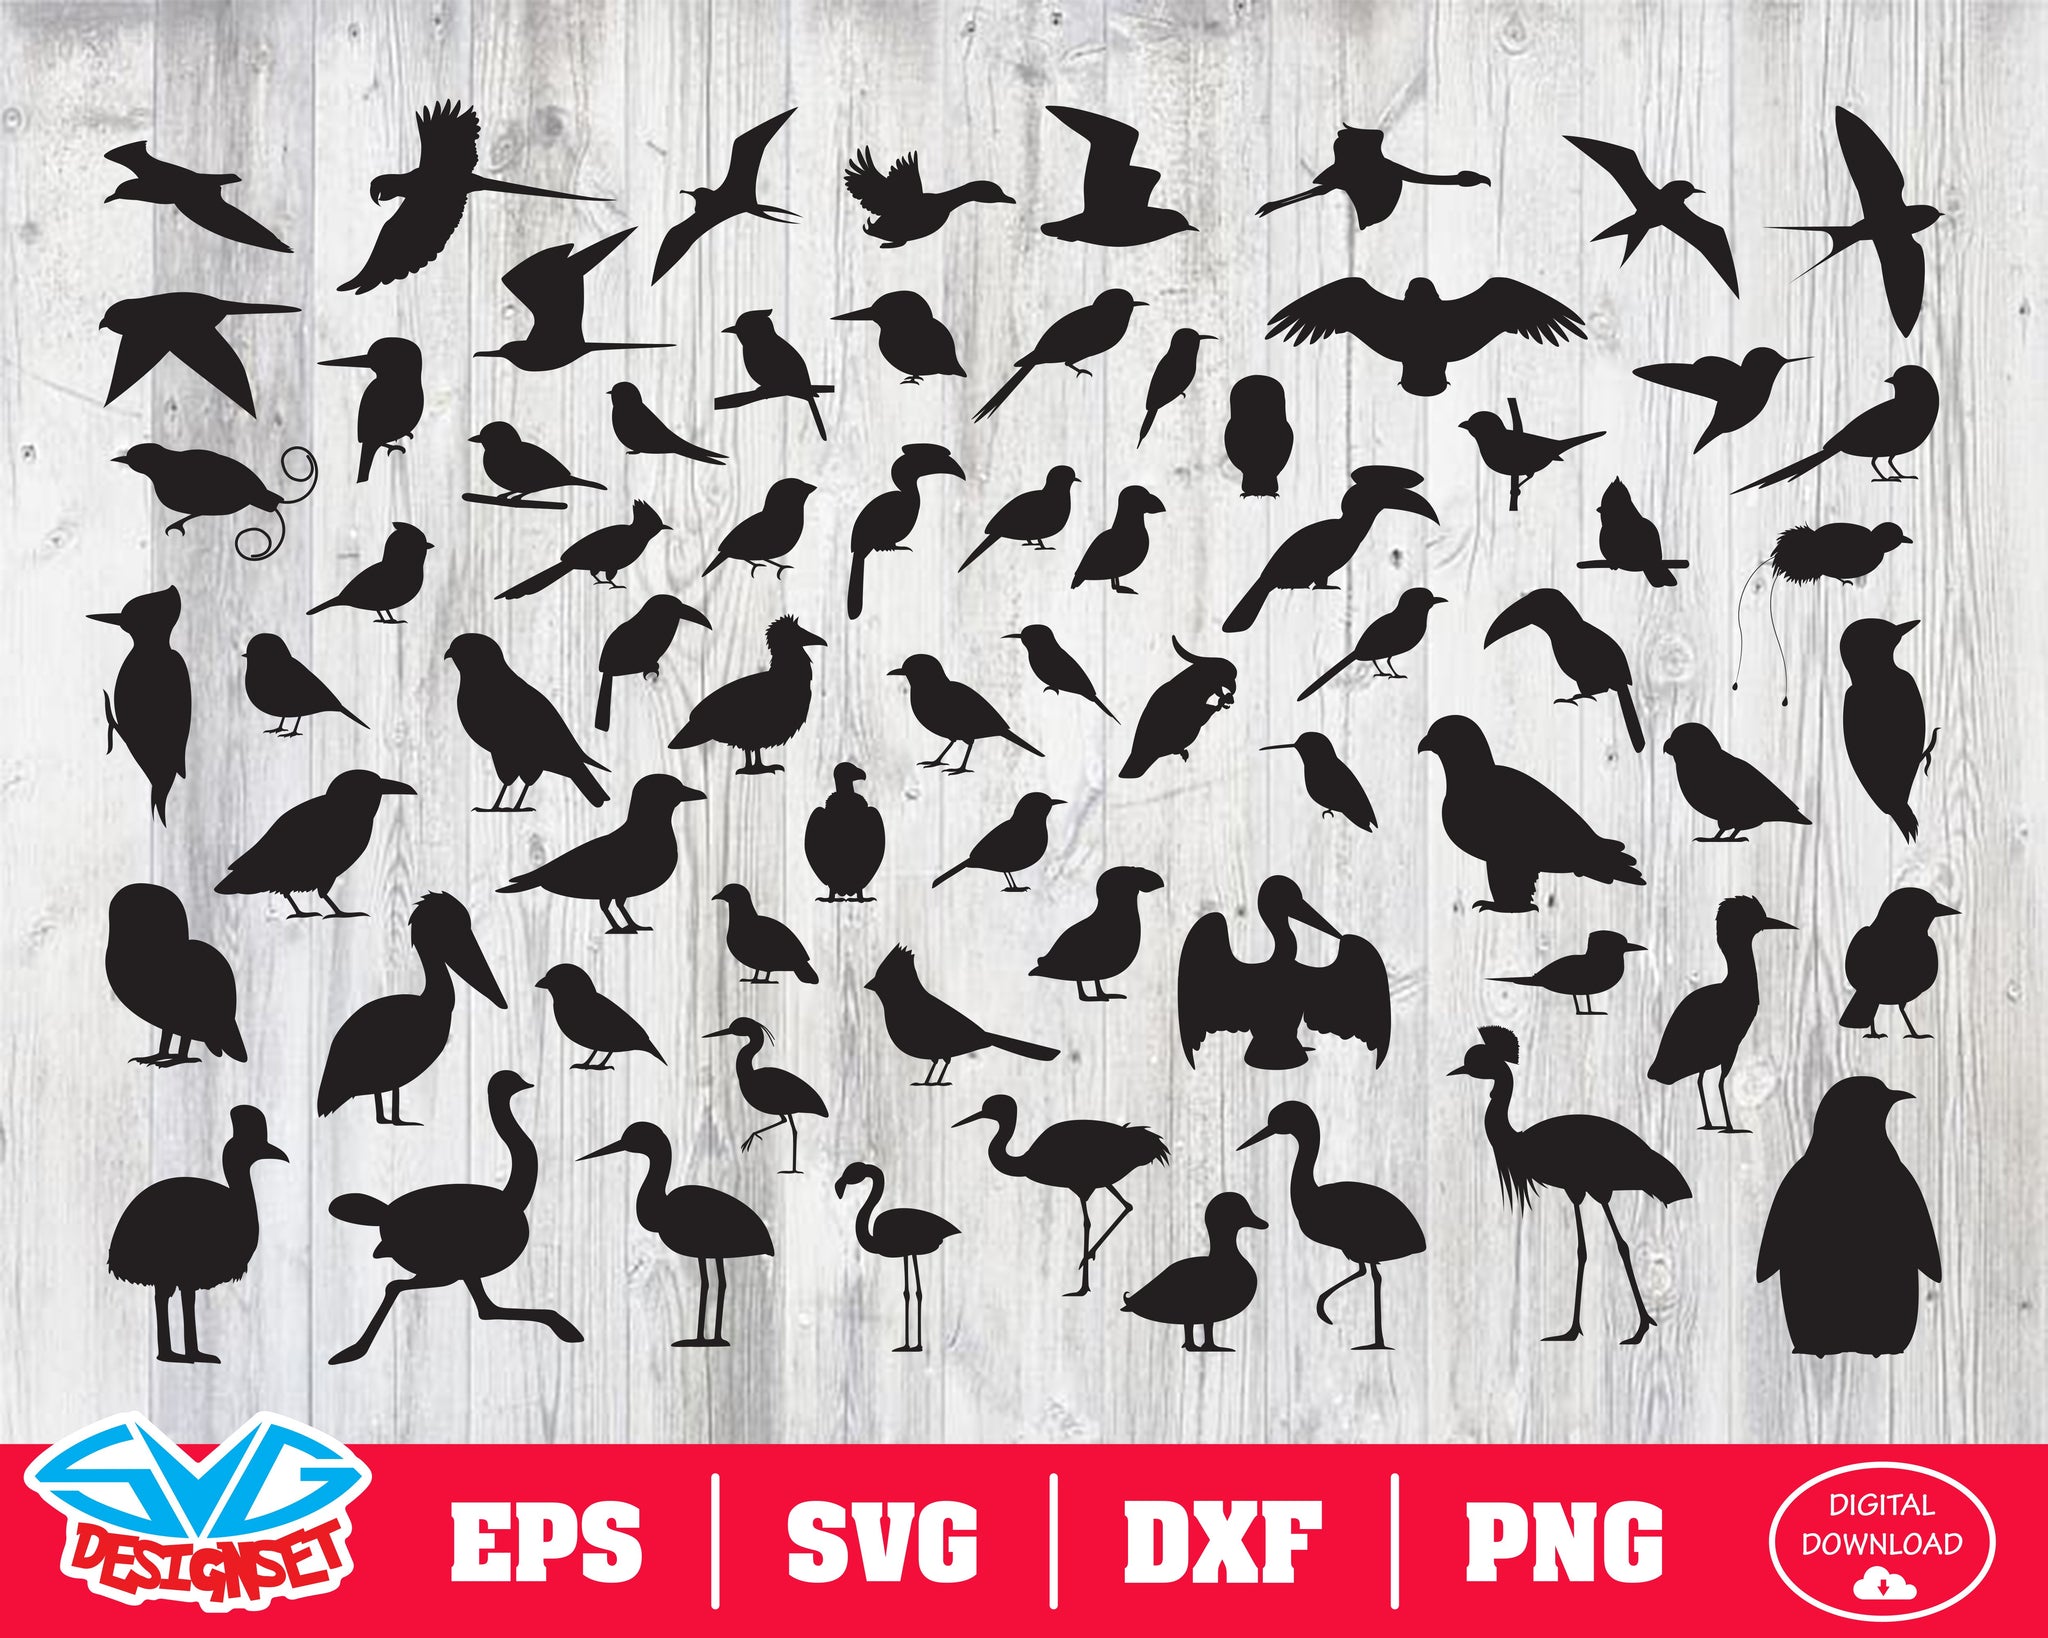 Bird Svg, Dxf, Eps, Png, Clipart, Silhouette and Cutfiles - SVGDesignSets